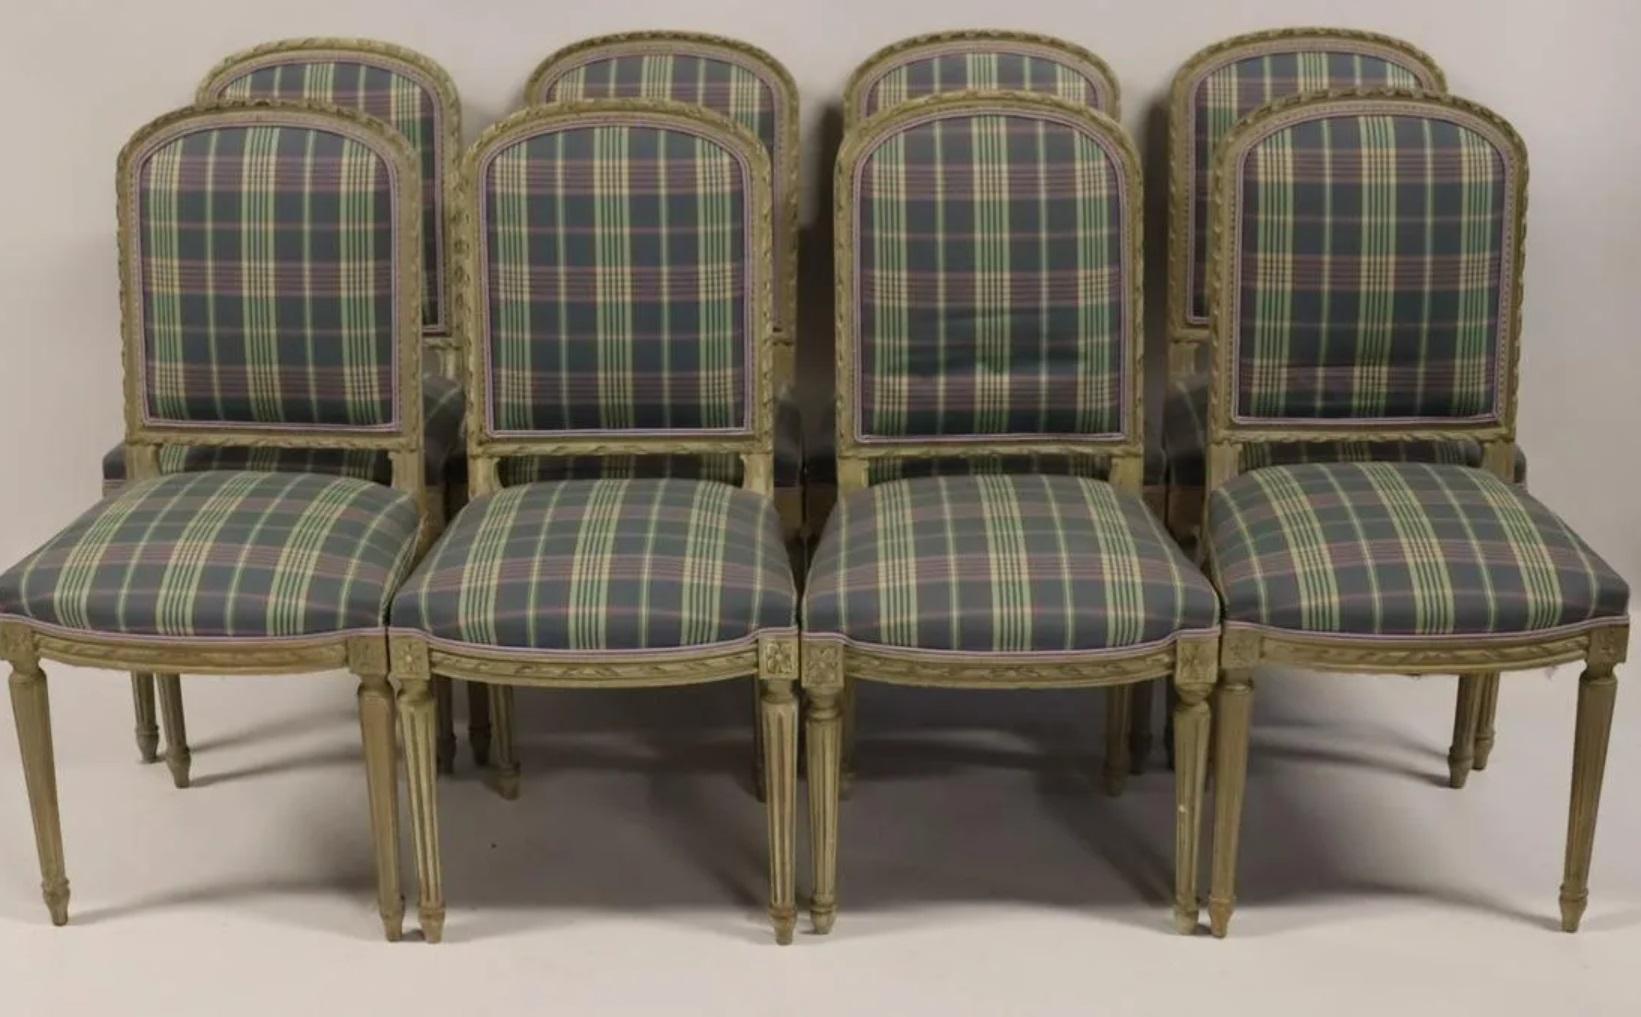 A set of 10 French Louis XVI style dining chairs with arch backs and fluted legs, painted and carved wood with plaid upholstery. The upholstery on the seat and back is accented with complementary lavender trim. 